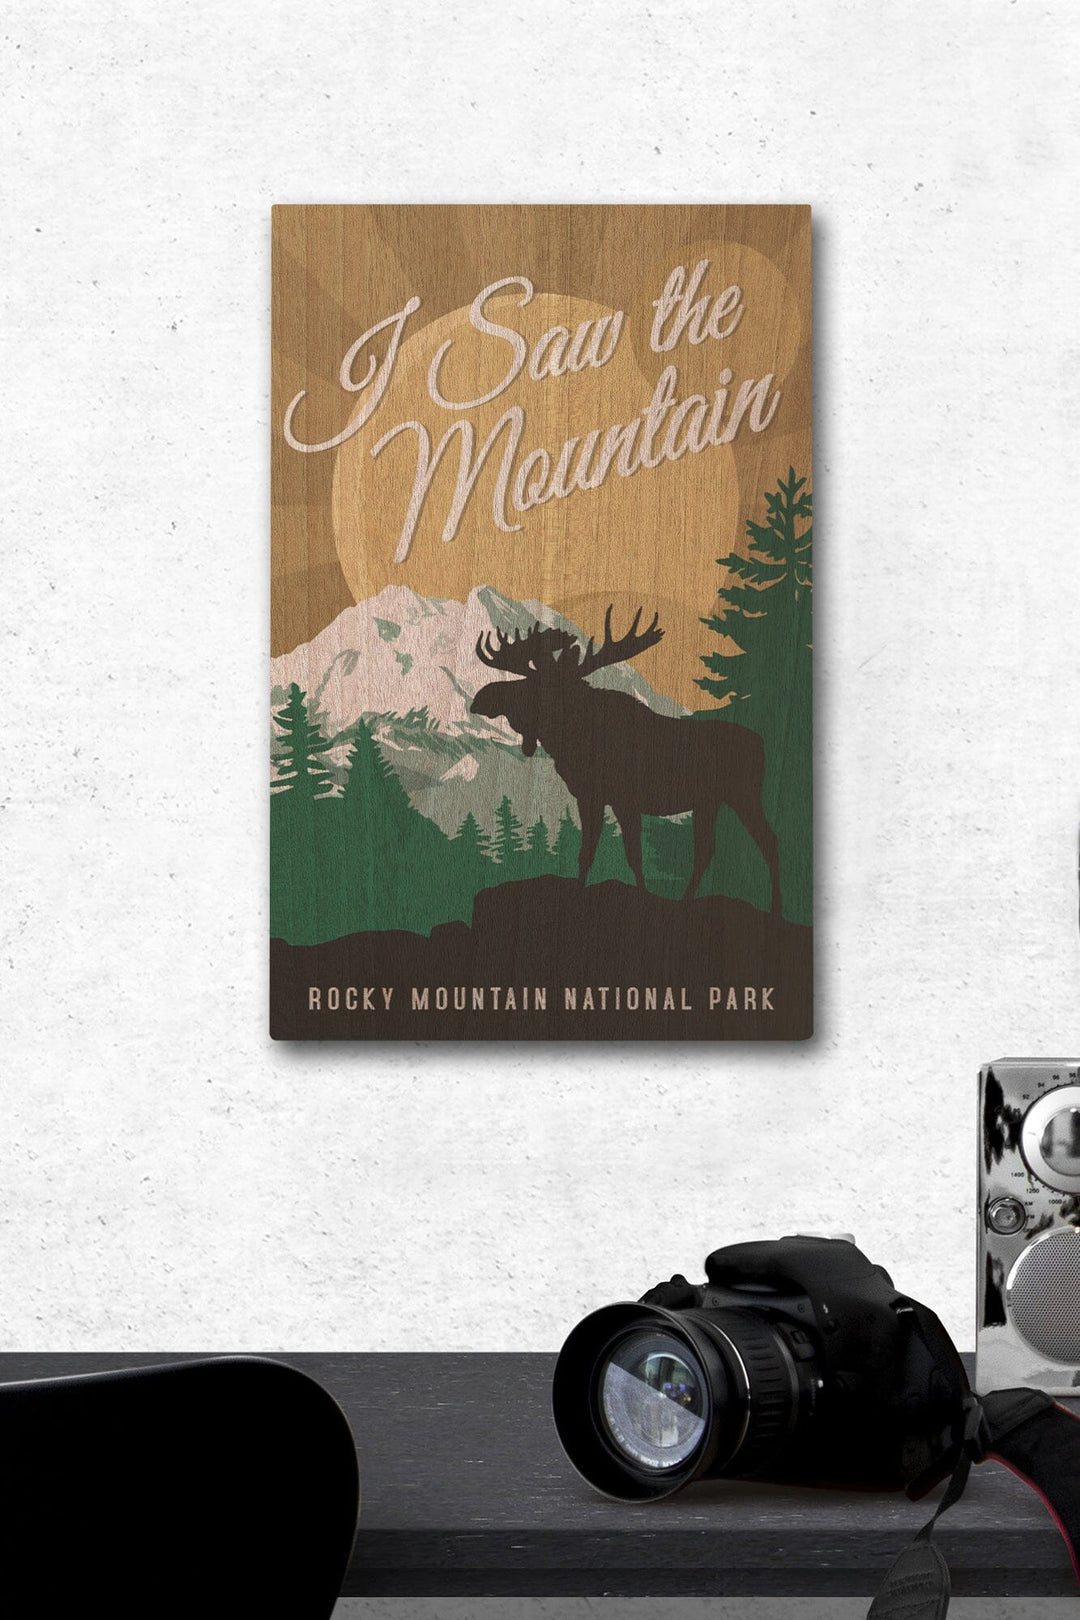 Rocky Mountain National Park, Colorado, I Saw the Mountain, Moose Silhouette, Vector, Lantern Press Artwork, Wood Signs and Postcards Wood Lantern Press 12 x 18 Wood Gallery Print 